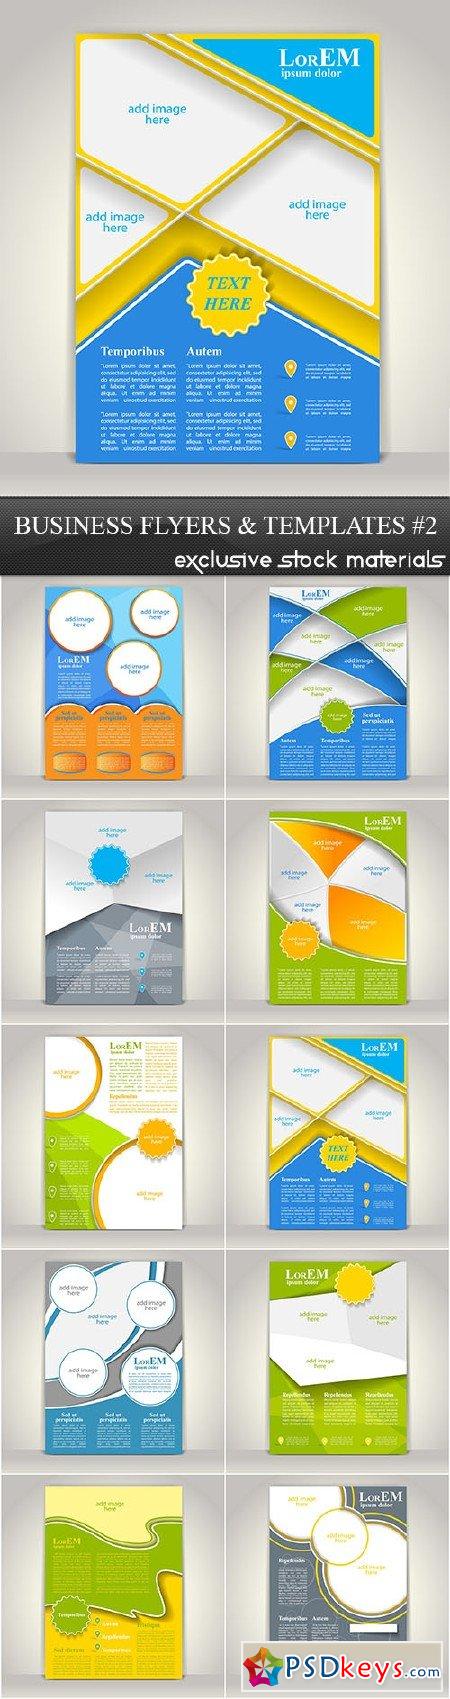 Business Flyers and Templates #2 10xEPS